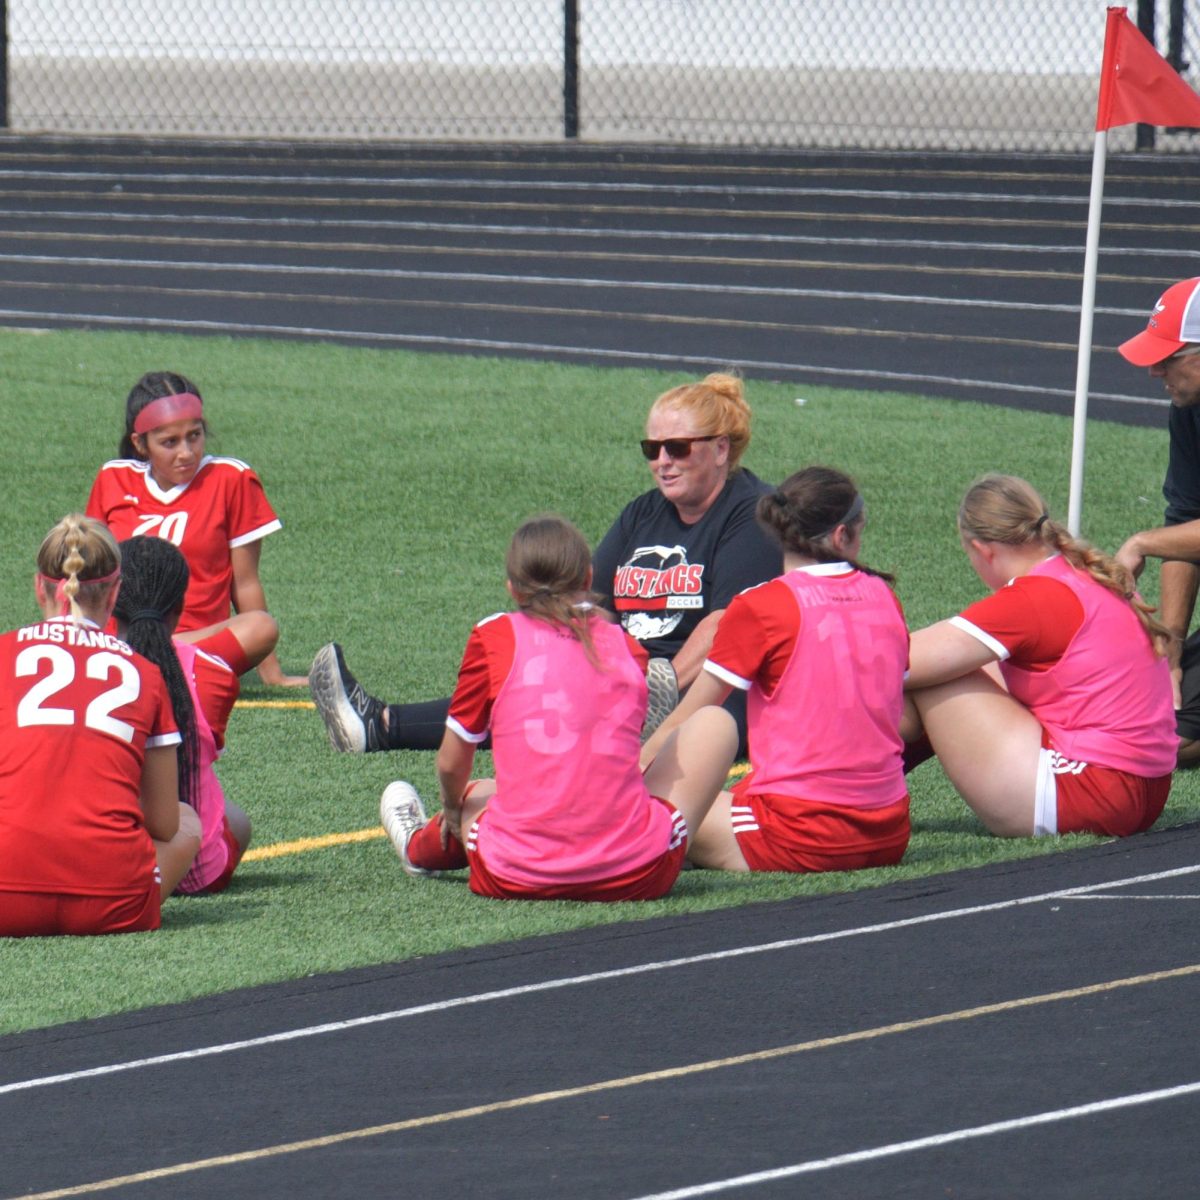 LETS+TALK+Sitting+together%2C+the+girls+varsity+soccer+team+and+Coach+Valerie+Pflum+run+through+plays+together+after+a+loss.+The+team+makes+it+a+point+to+review+their+performance+for+improvement+in+future+games.+